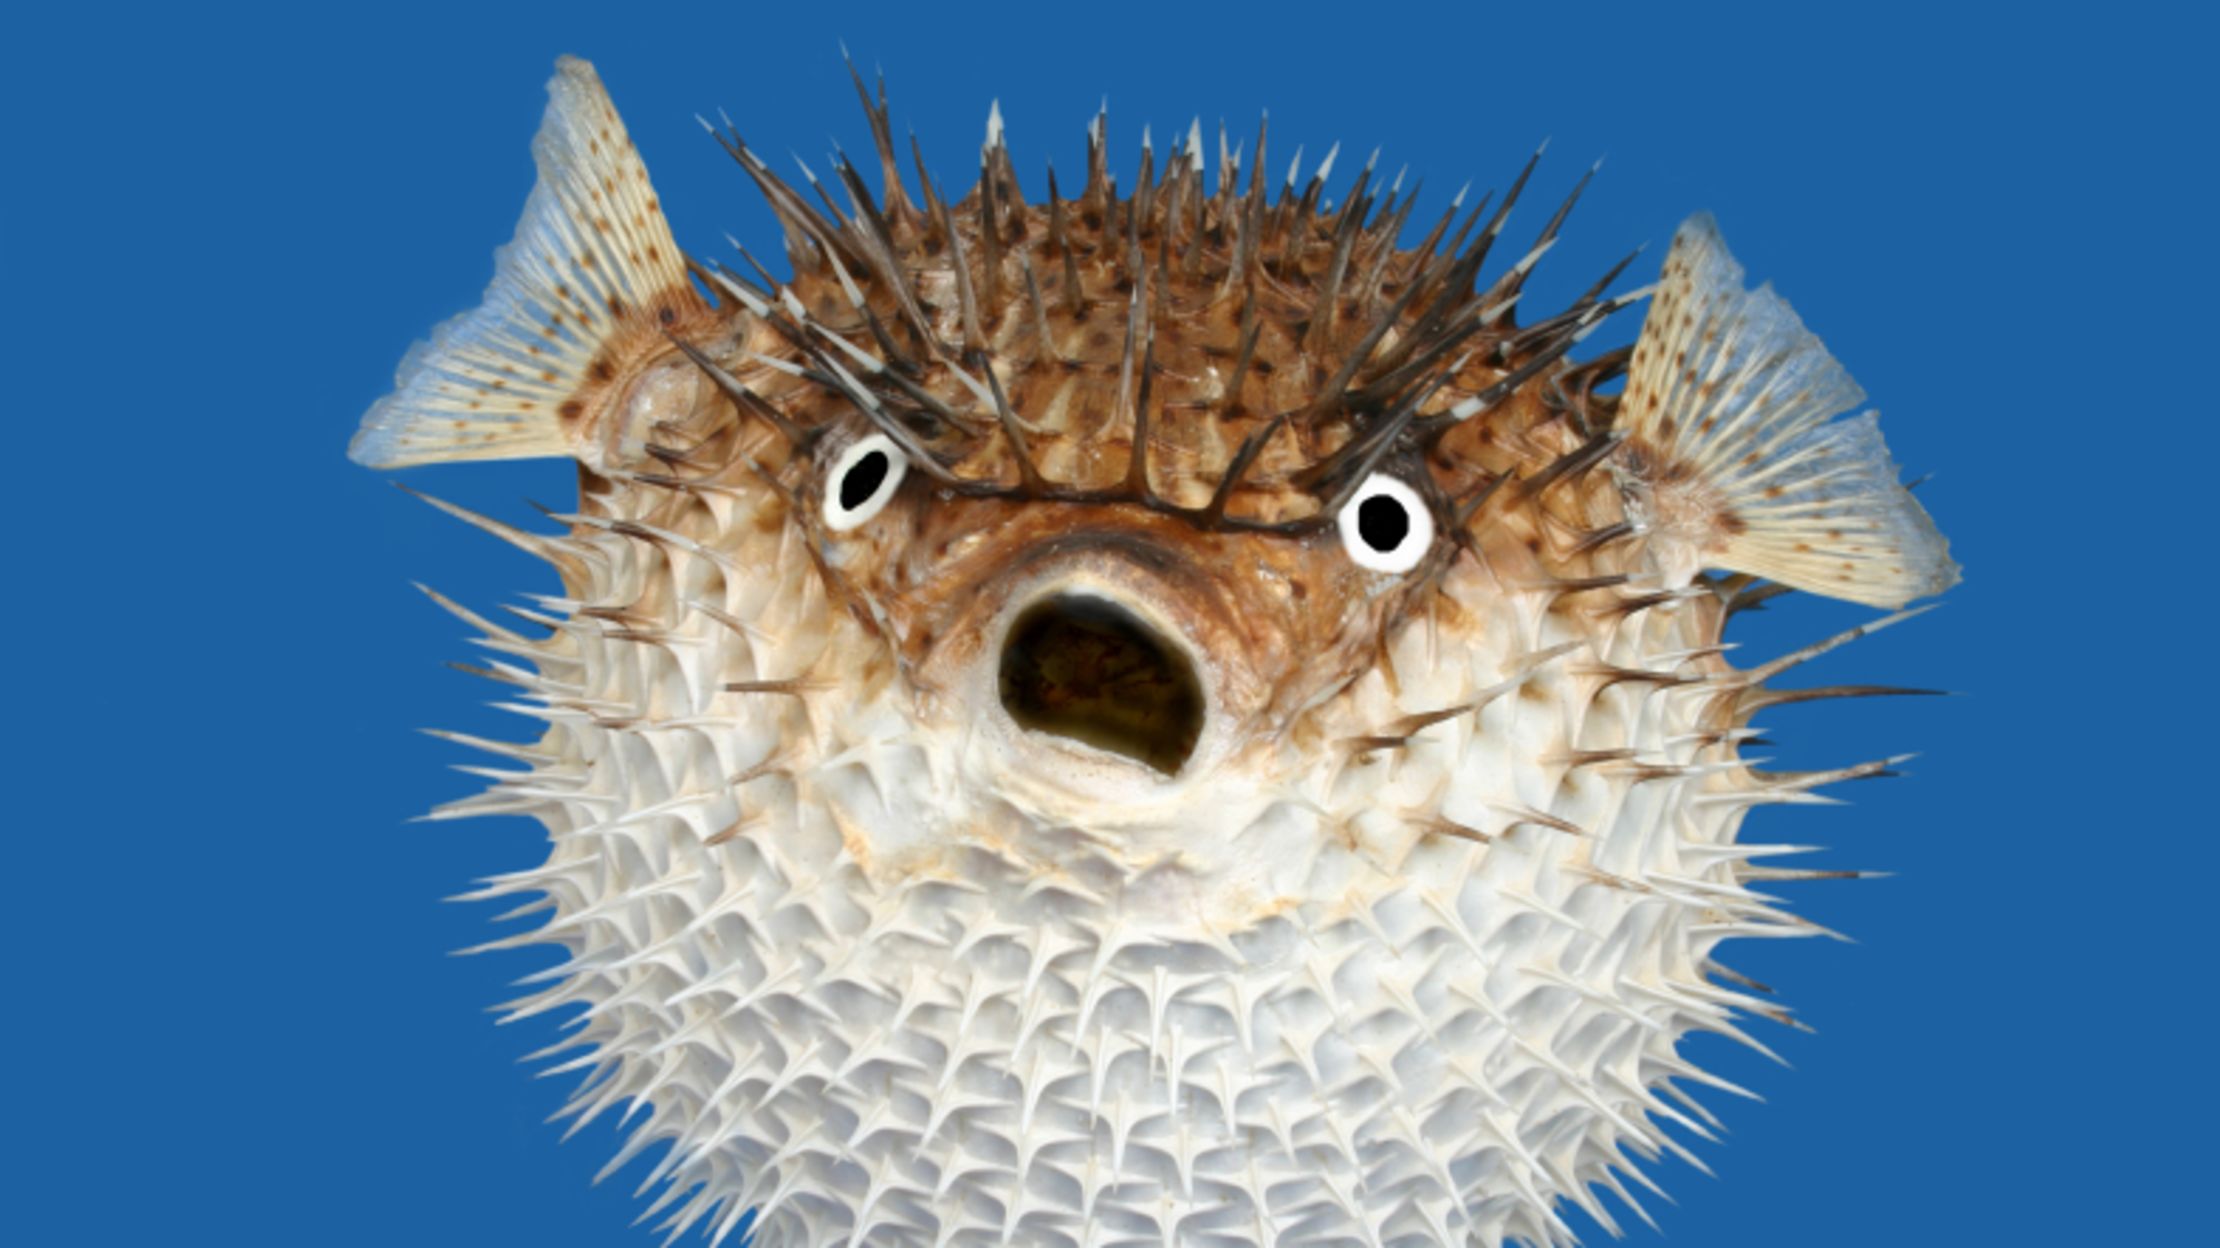 Do Pufferfish Hold Their Breath While Inflating Themselves? | Mental Floss